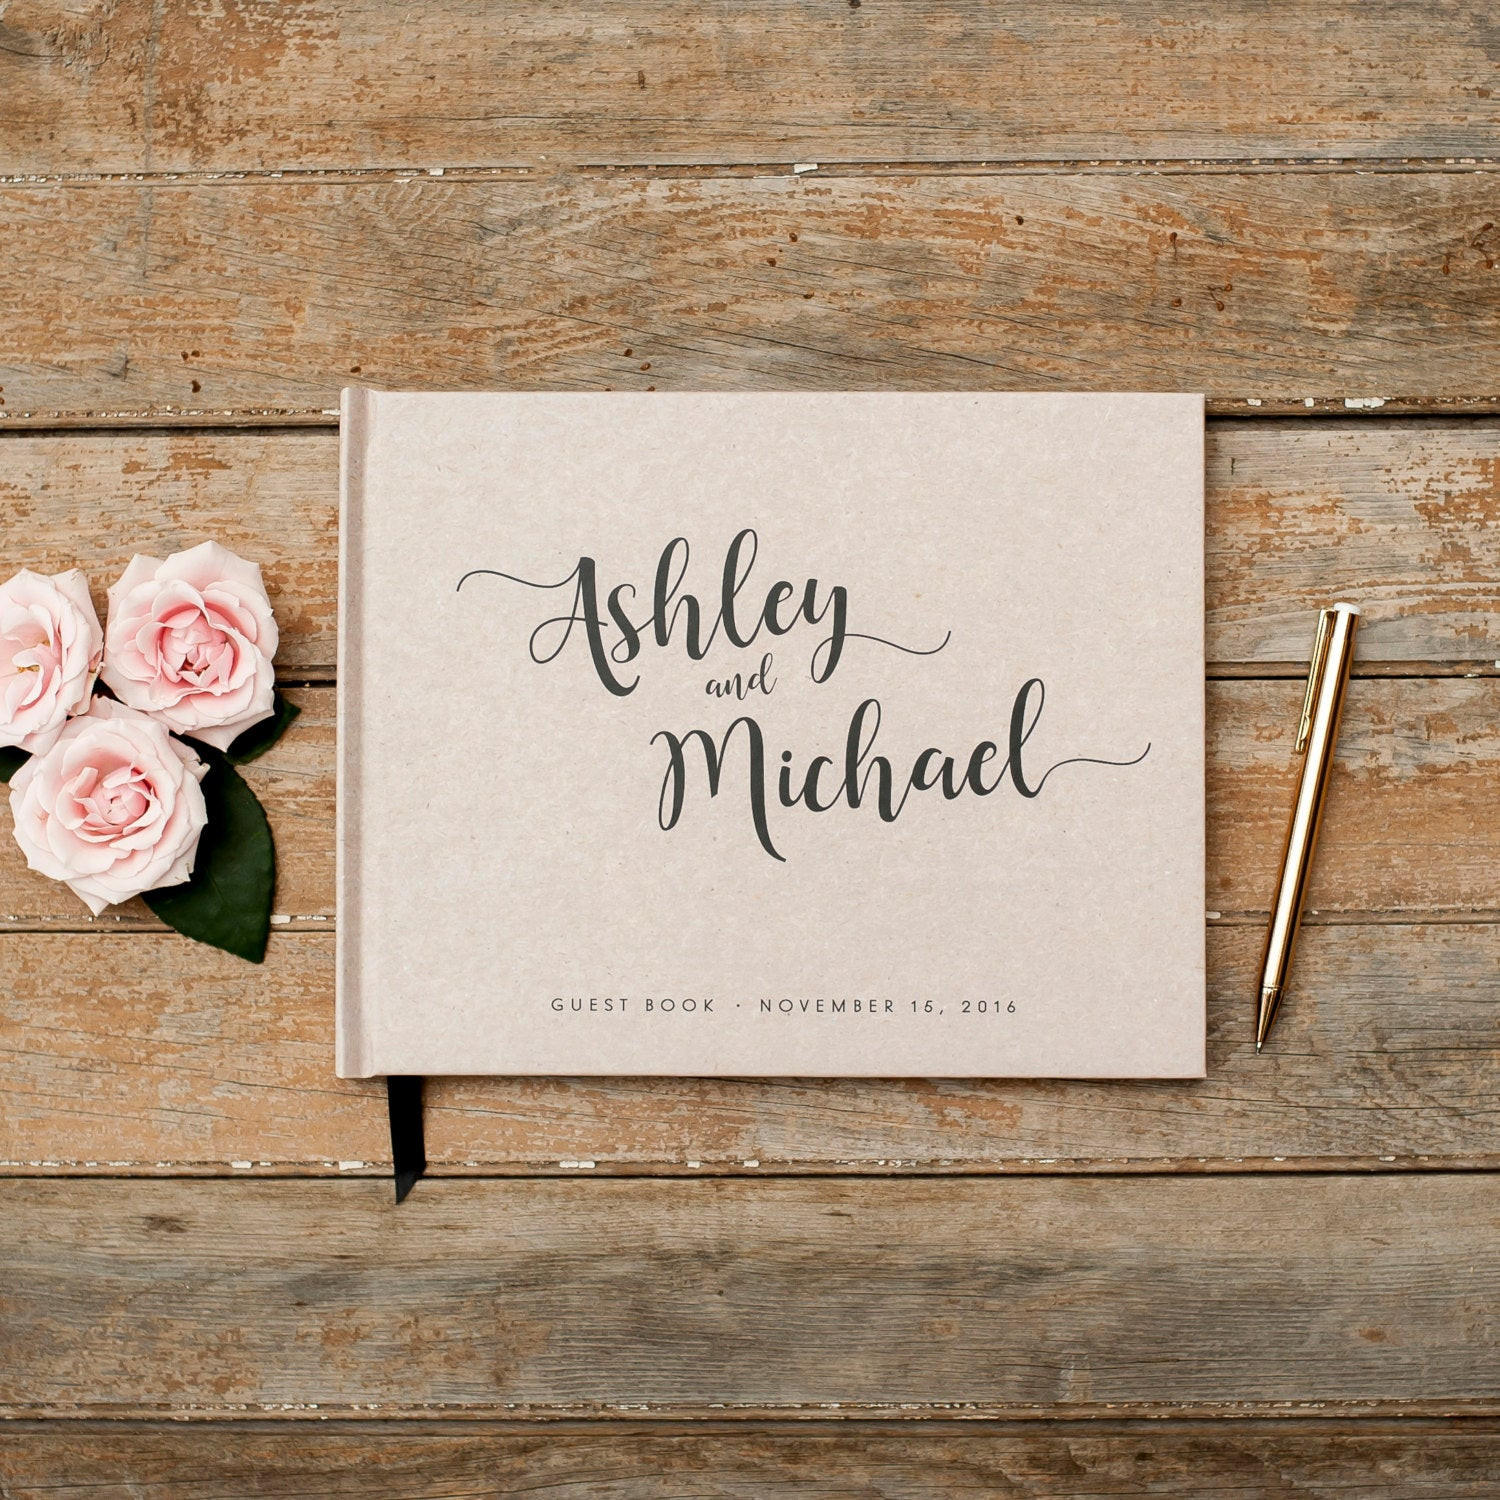 Wedding Guest Sign In Books
 Wedding Guest Book horizontal landscape guestbook sign in book